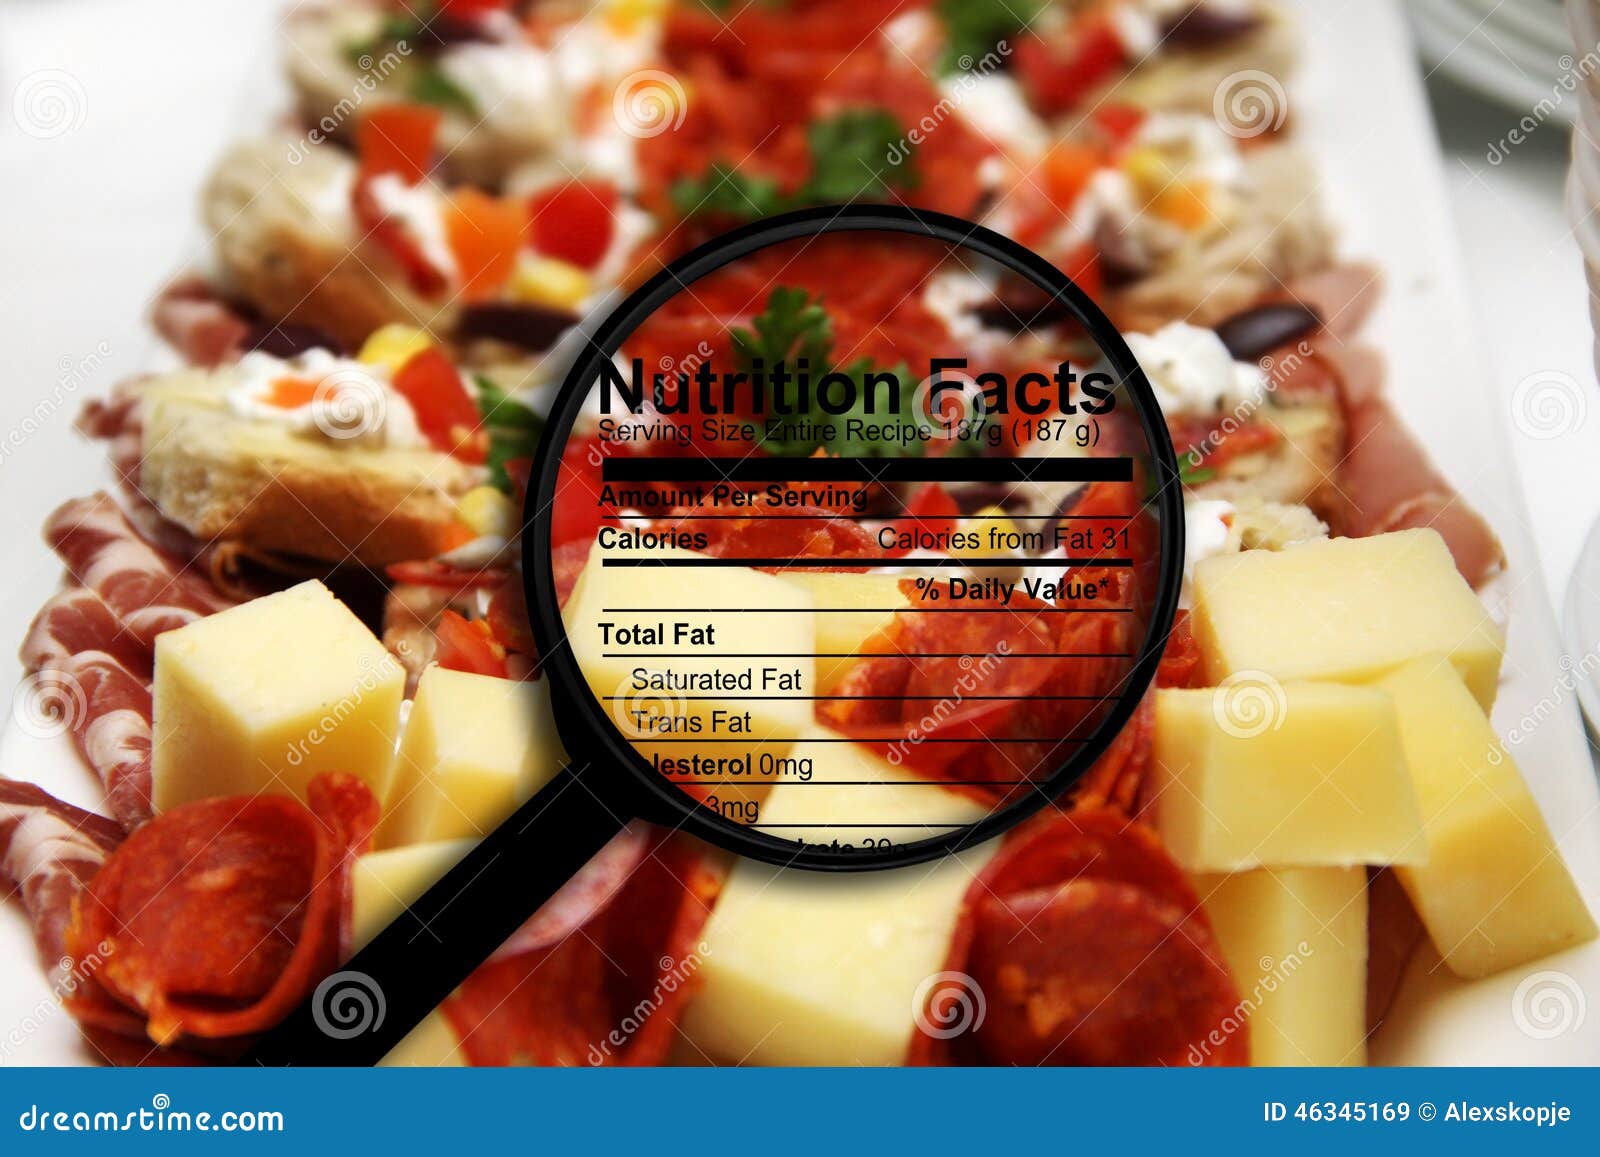 Cheese and meat stock image. Image of deli, rolled, sliced - 46345169 A Deli Sells Sliced Meat And Cheese